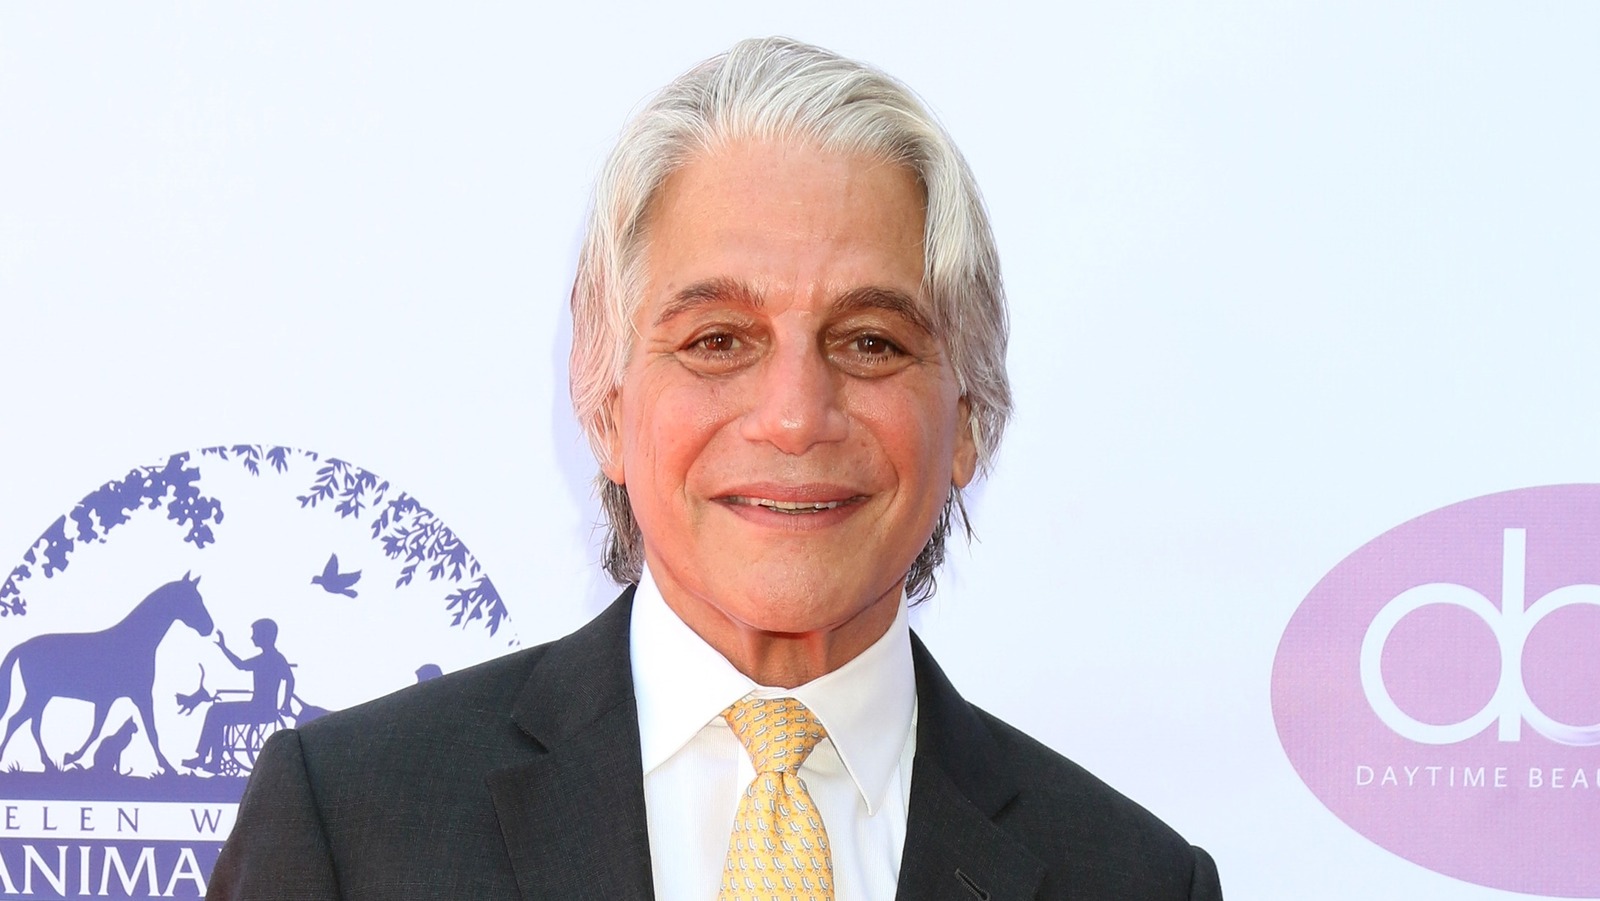 Legend Tony Danza Boards Season 2 Of And Just Like That...